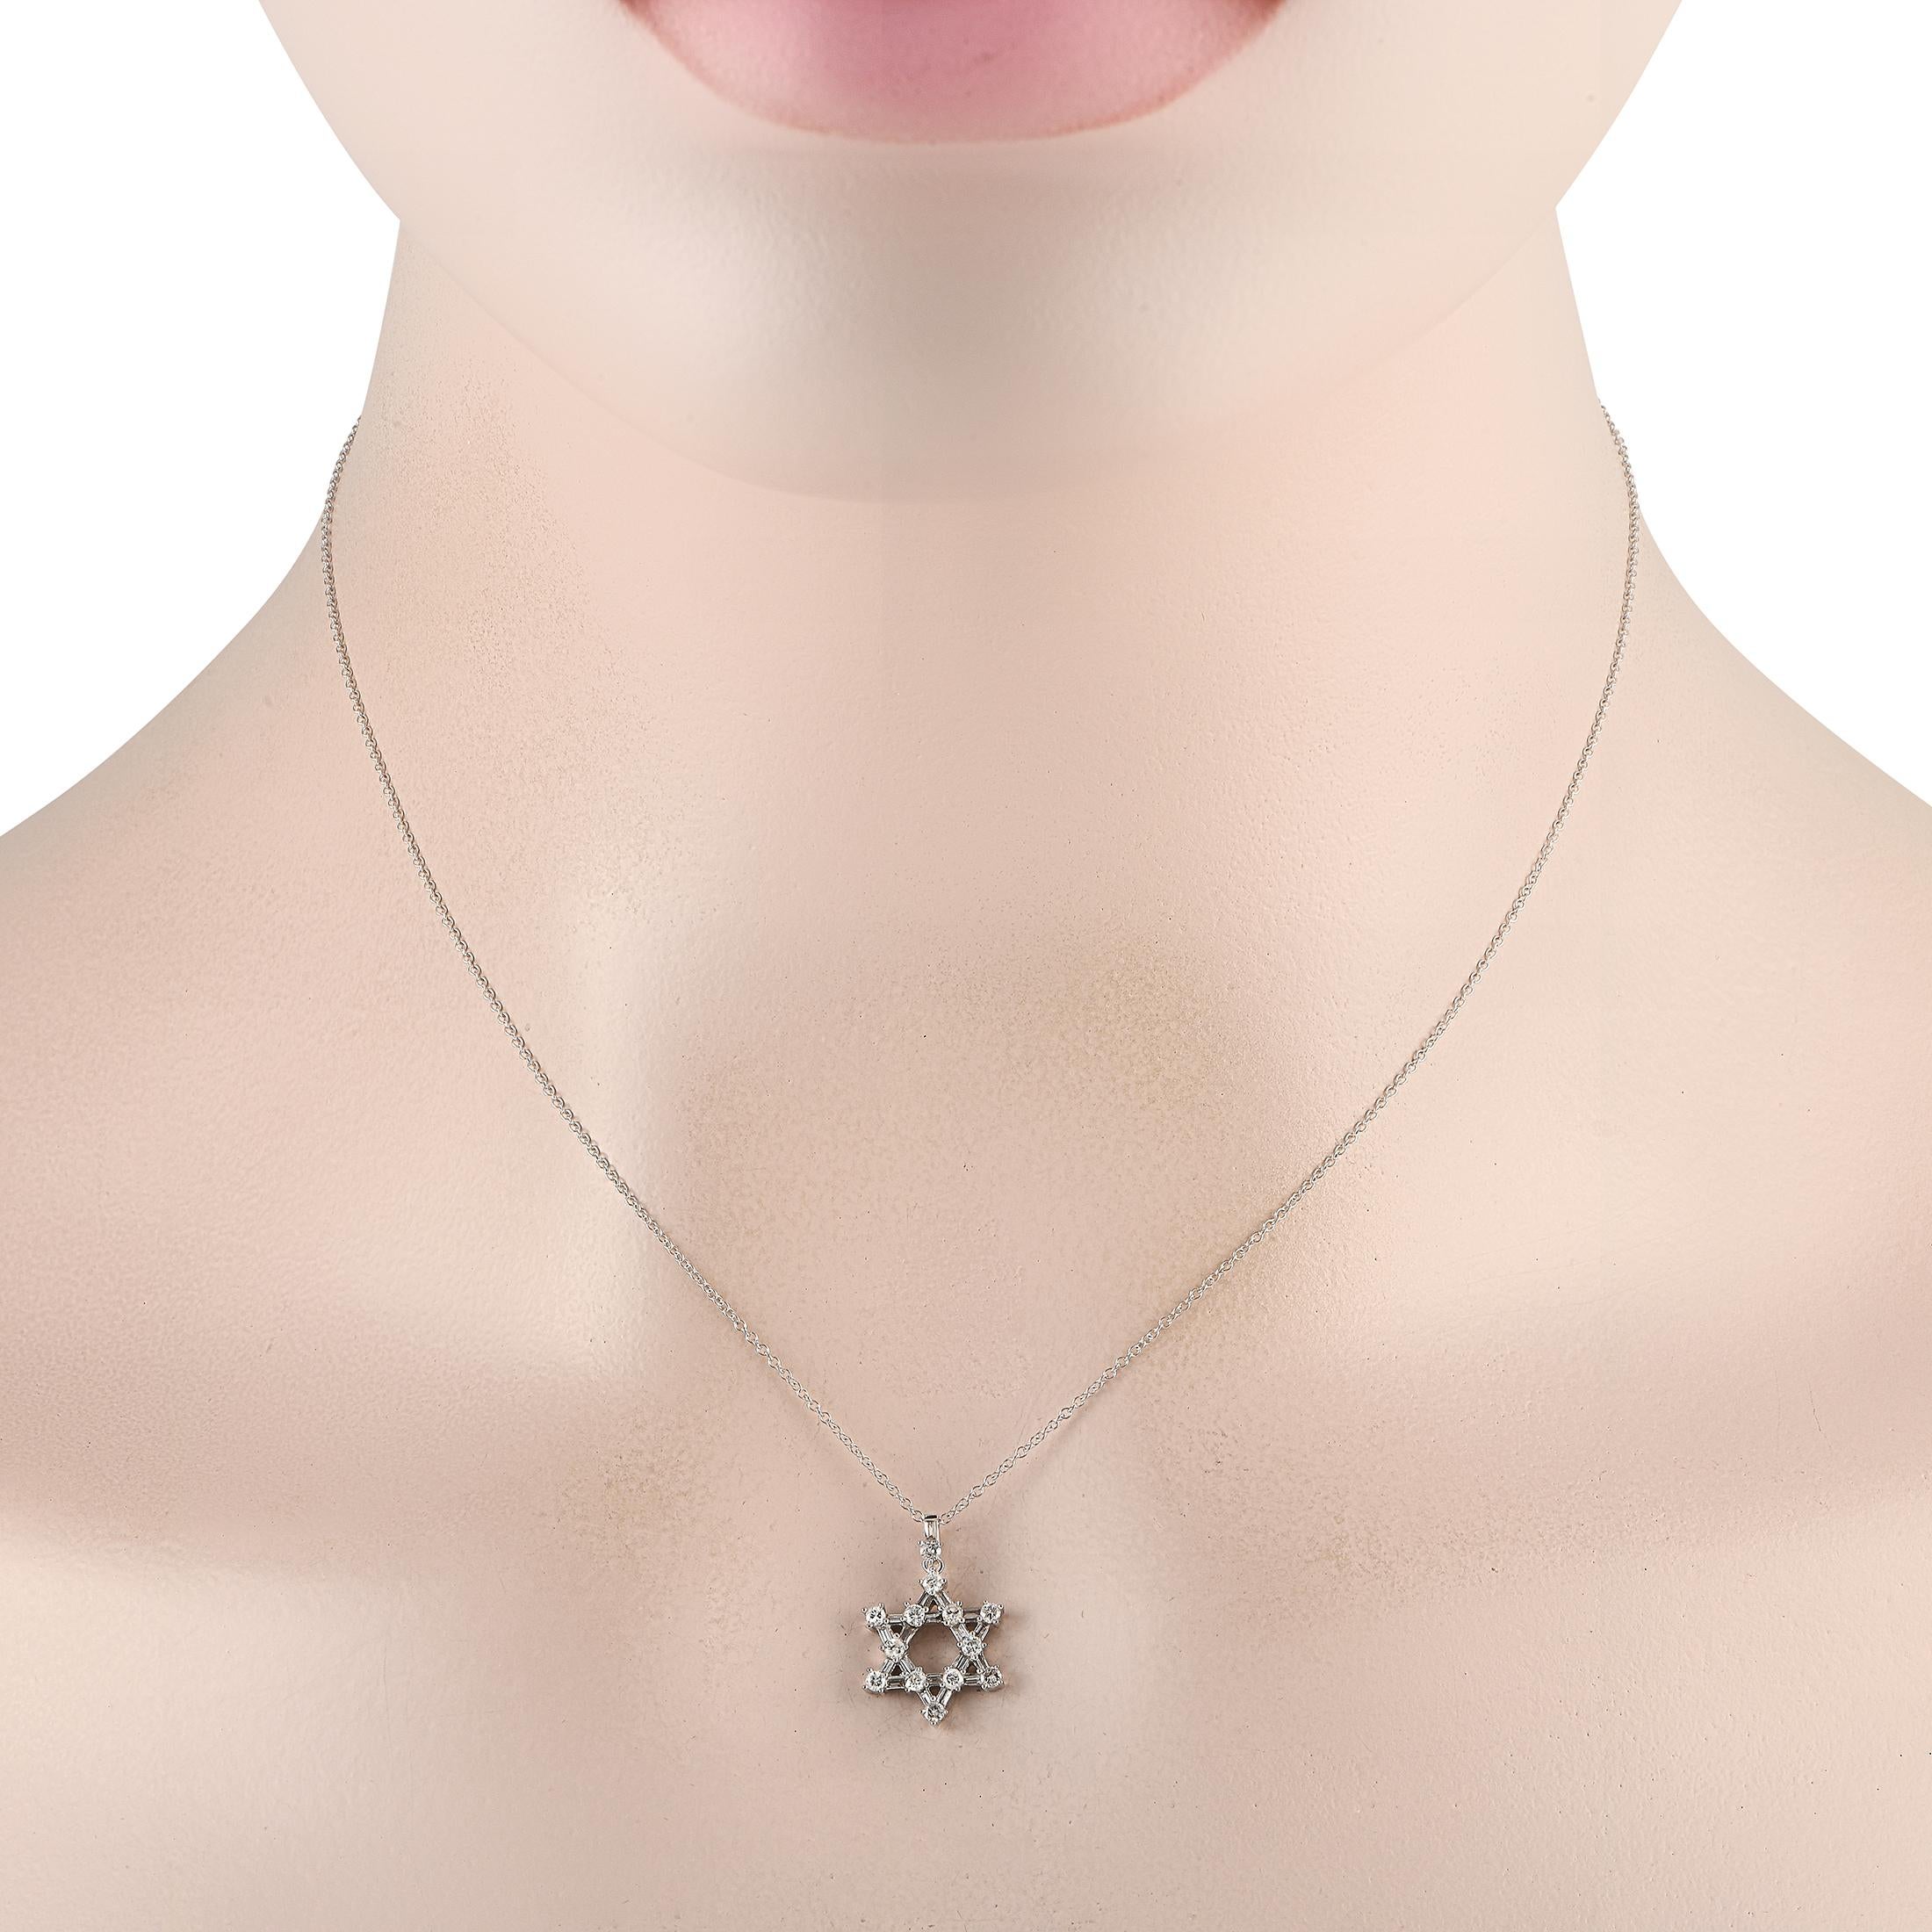 Do you prefer to wear the same minimalist jewelry day after day? Do it in style by picking this hexagram necklace. It features a thin chain in 14K white gold holding a six-pointed star pendant measuring less than half an inch. The white gold star is